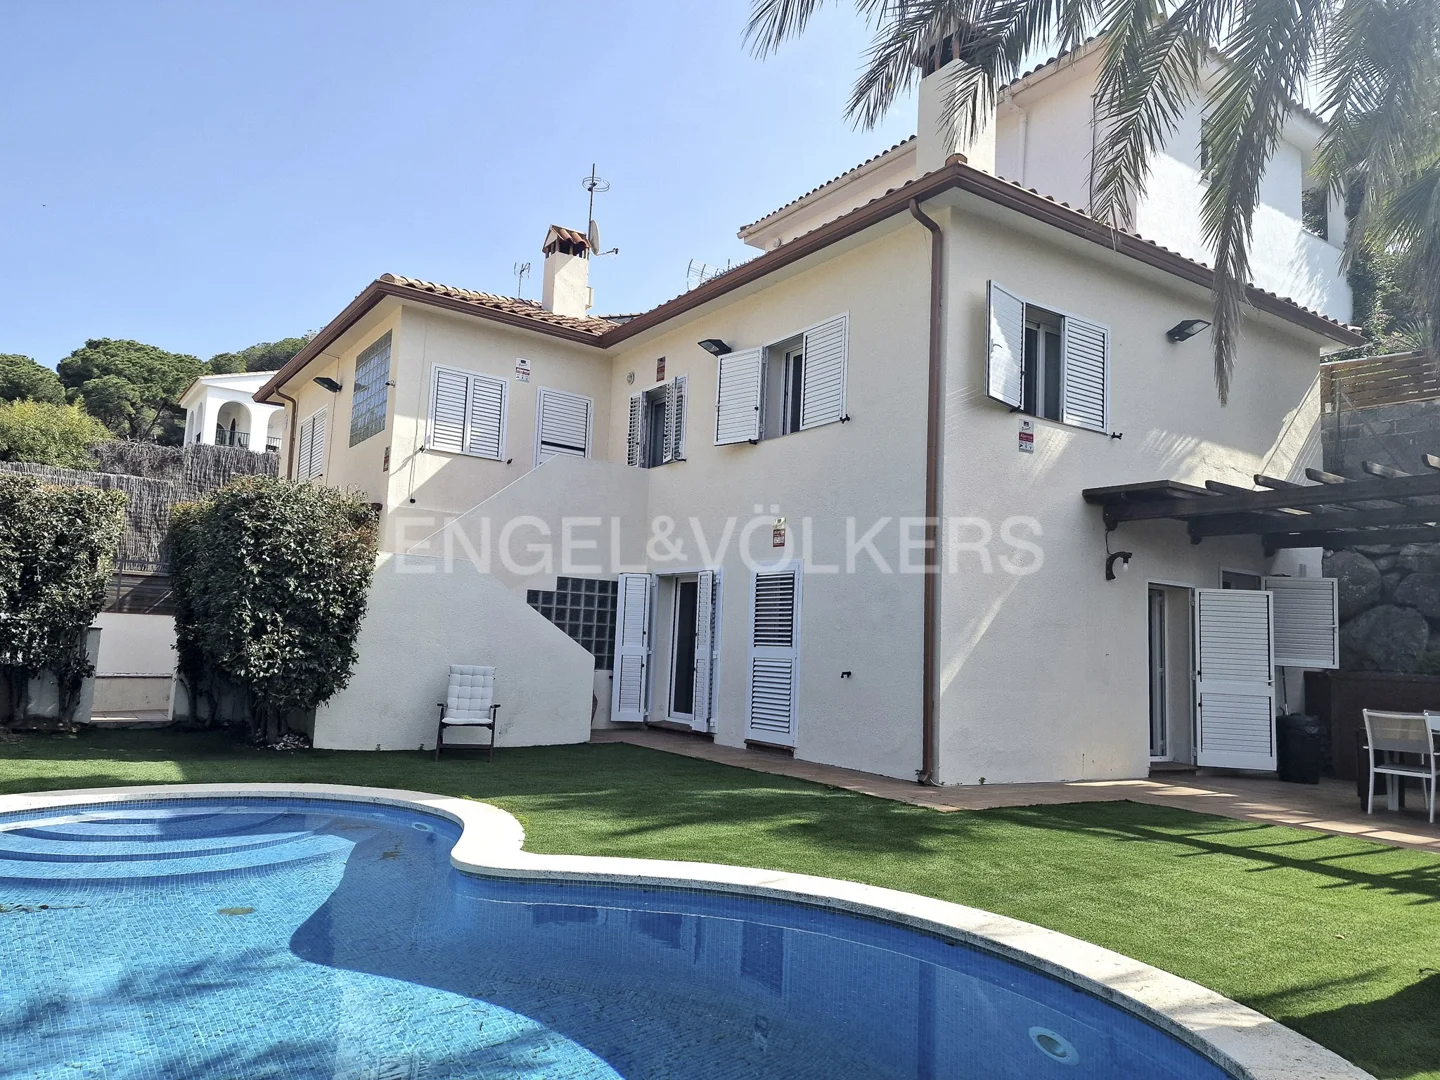 Renovated house with pool and garden ready to move in